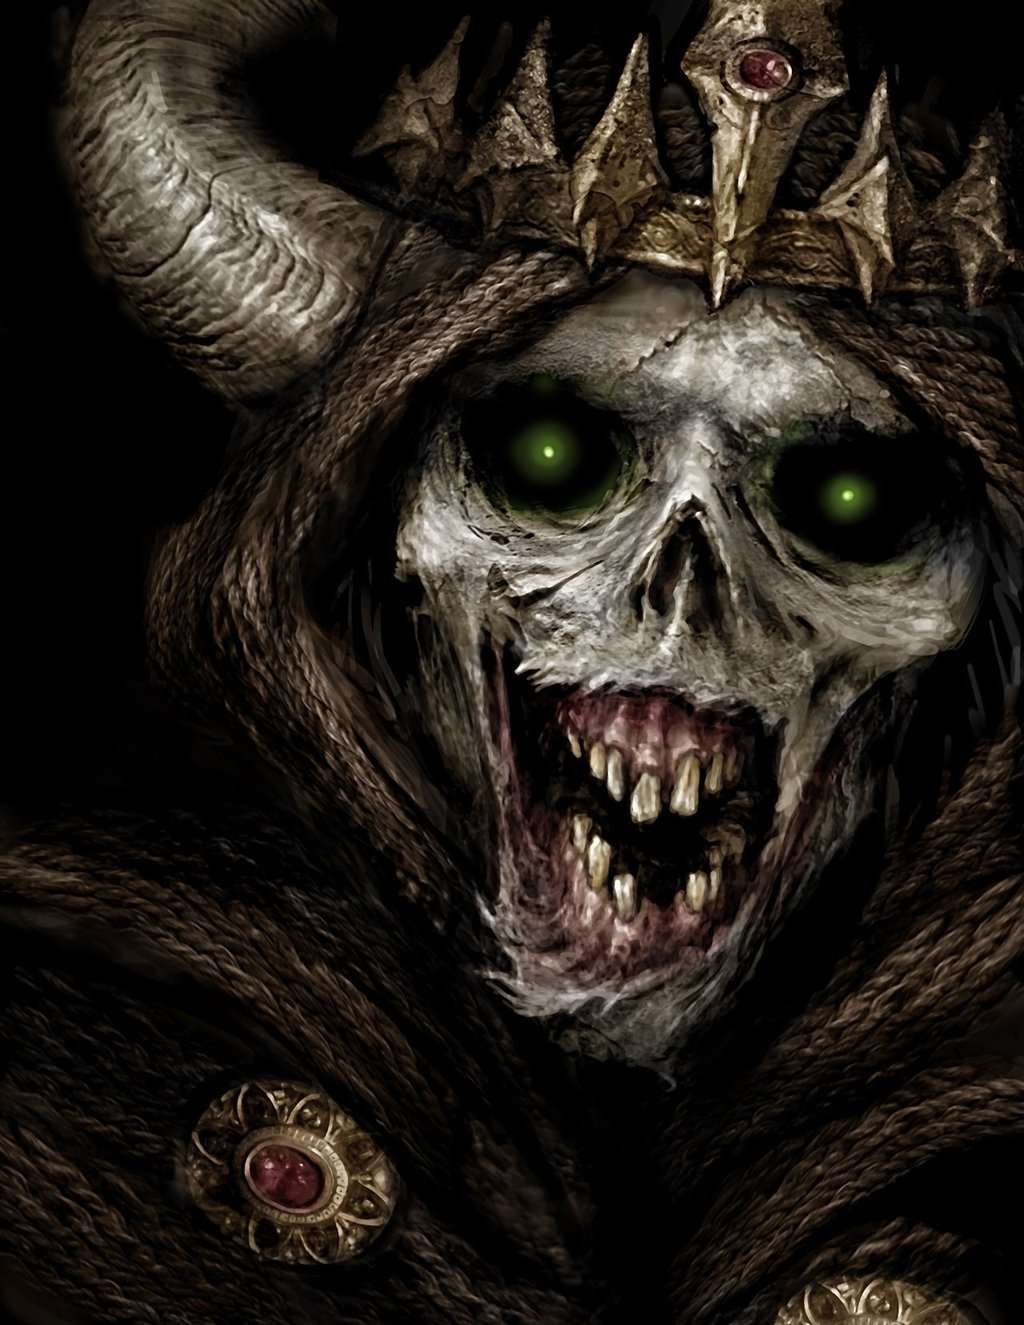 The Lich by SBWomack on